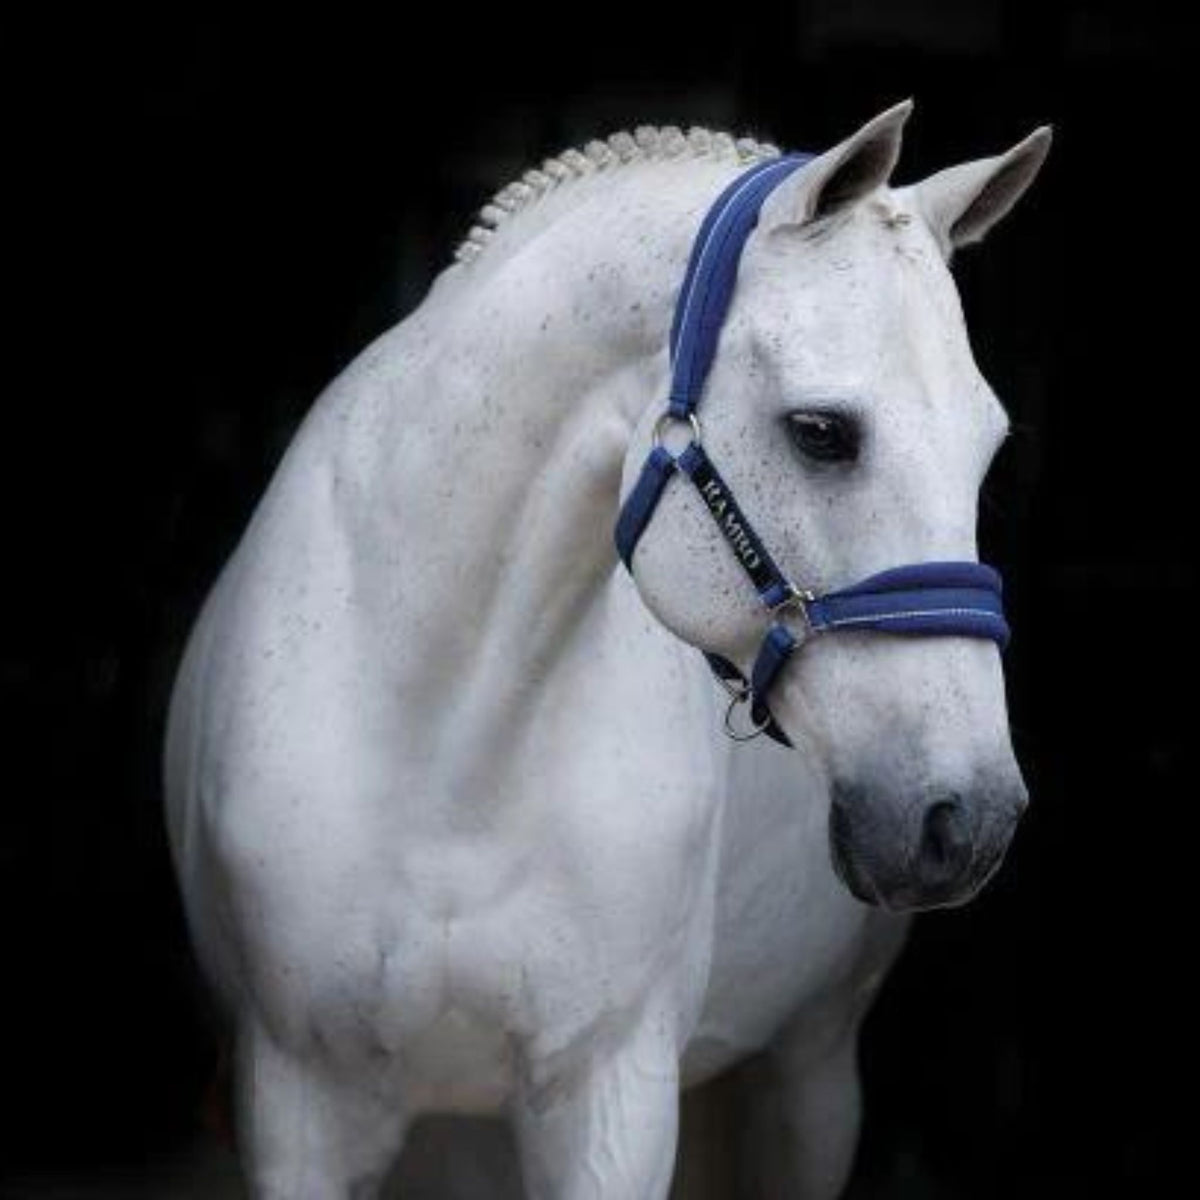 Royal blue fleece padded halter with light blue and black stitching, including stainless steel buckles.